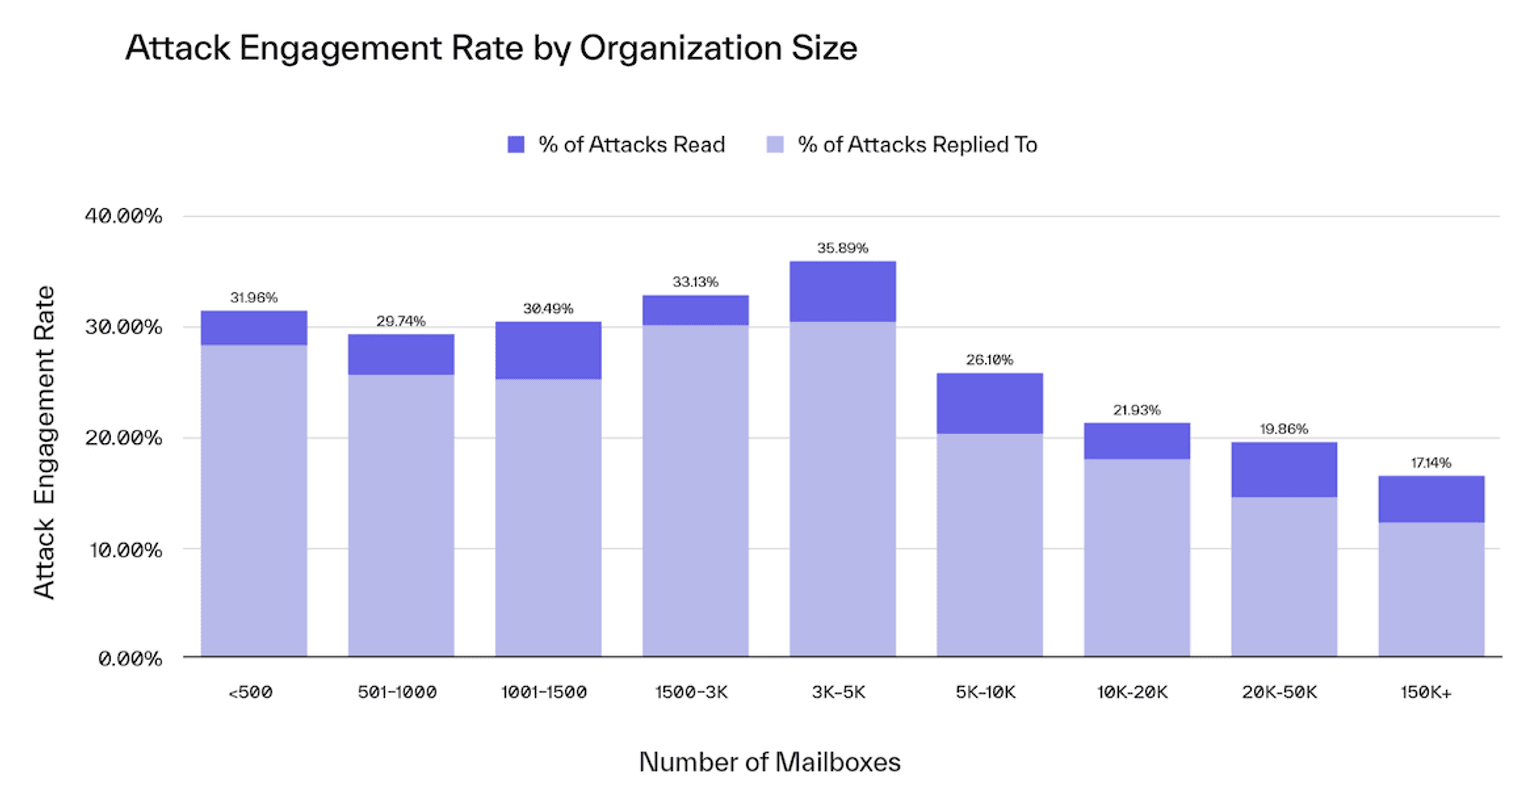 Attack Engagement Rate by Organization Size